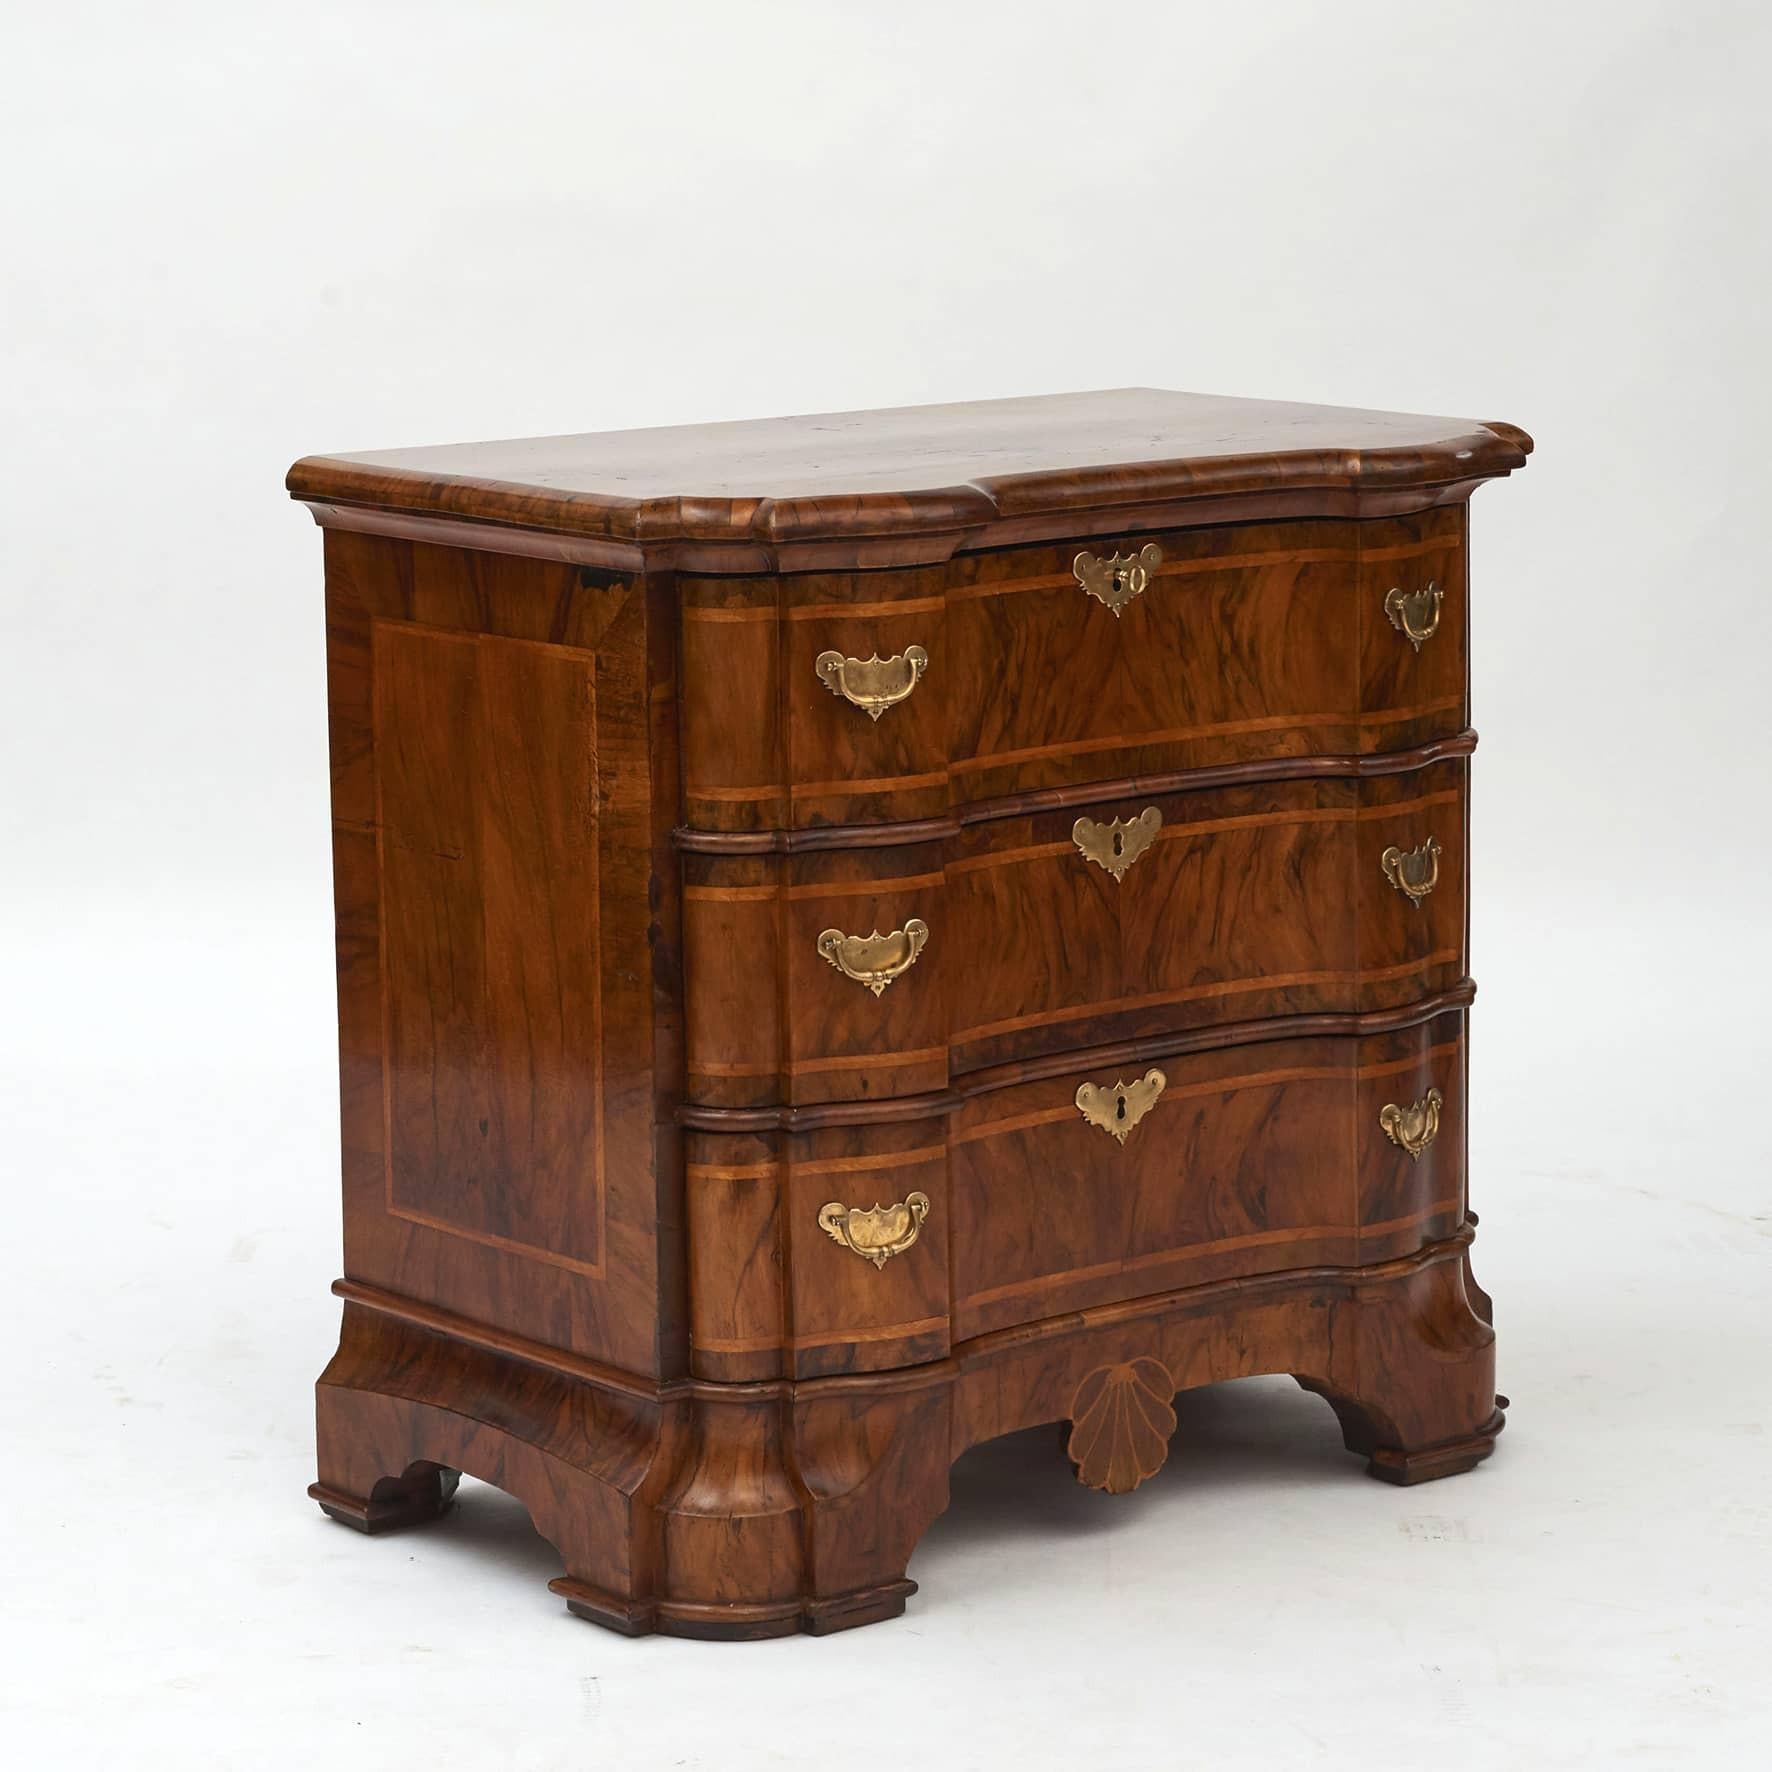 Rare Baroque chest of drawers with architectural characteristics.
Walnut veneer with light marquetry on front, top and sides.
Serpentine front with 3 drawers.
Original fittings.
From castle in Braunschweig, Germany approx. 1730

In great